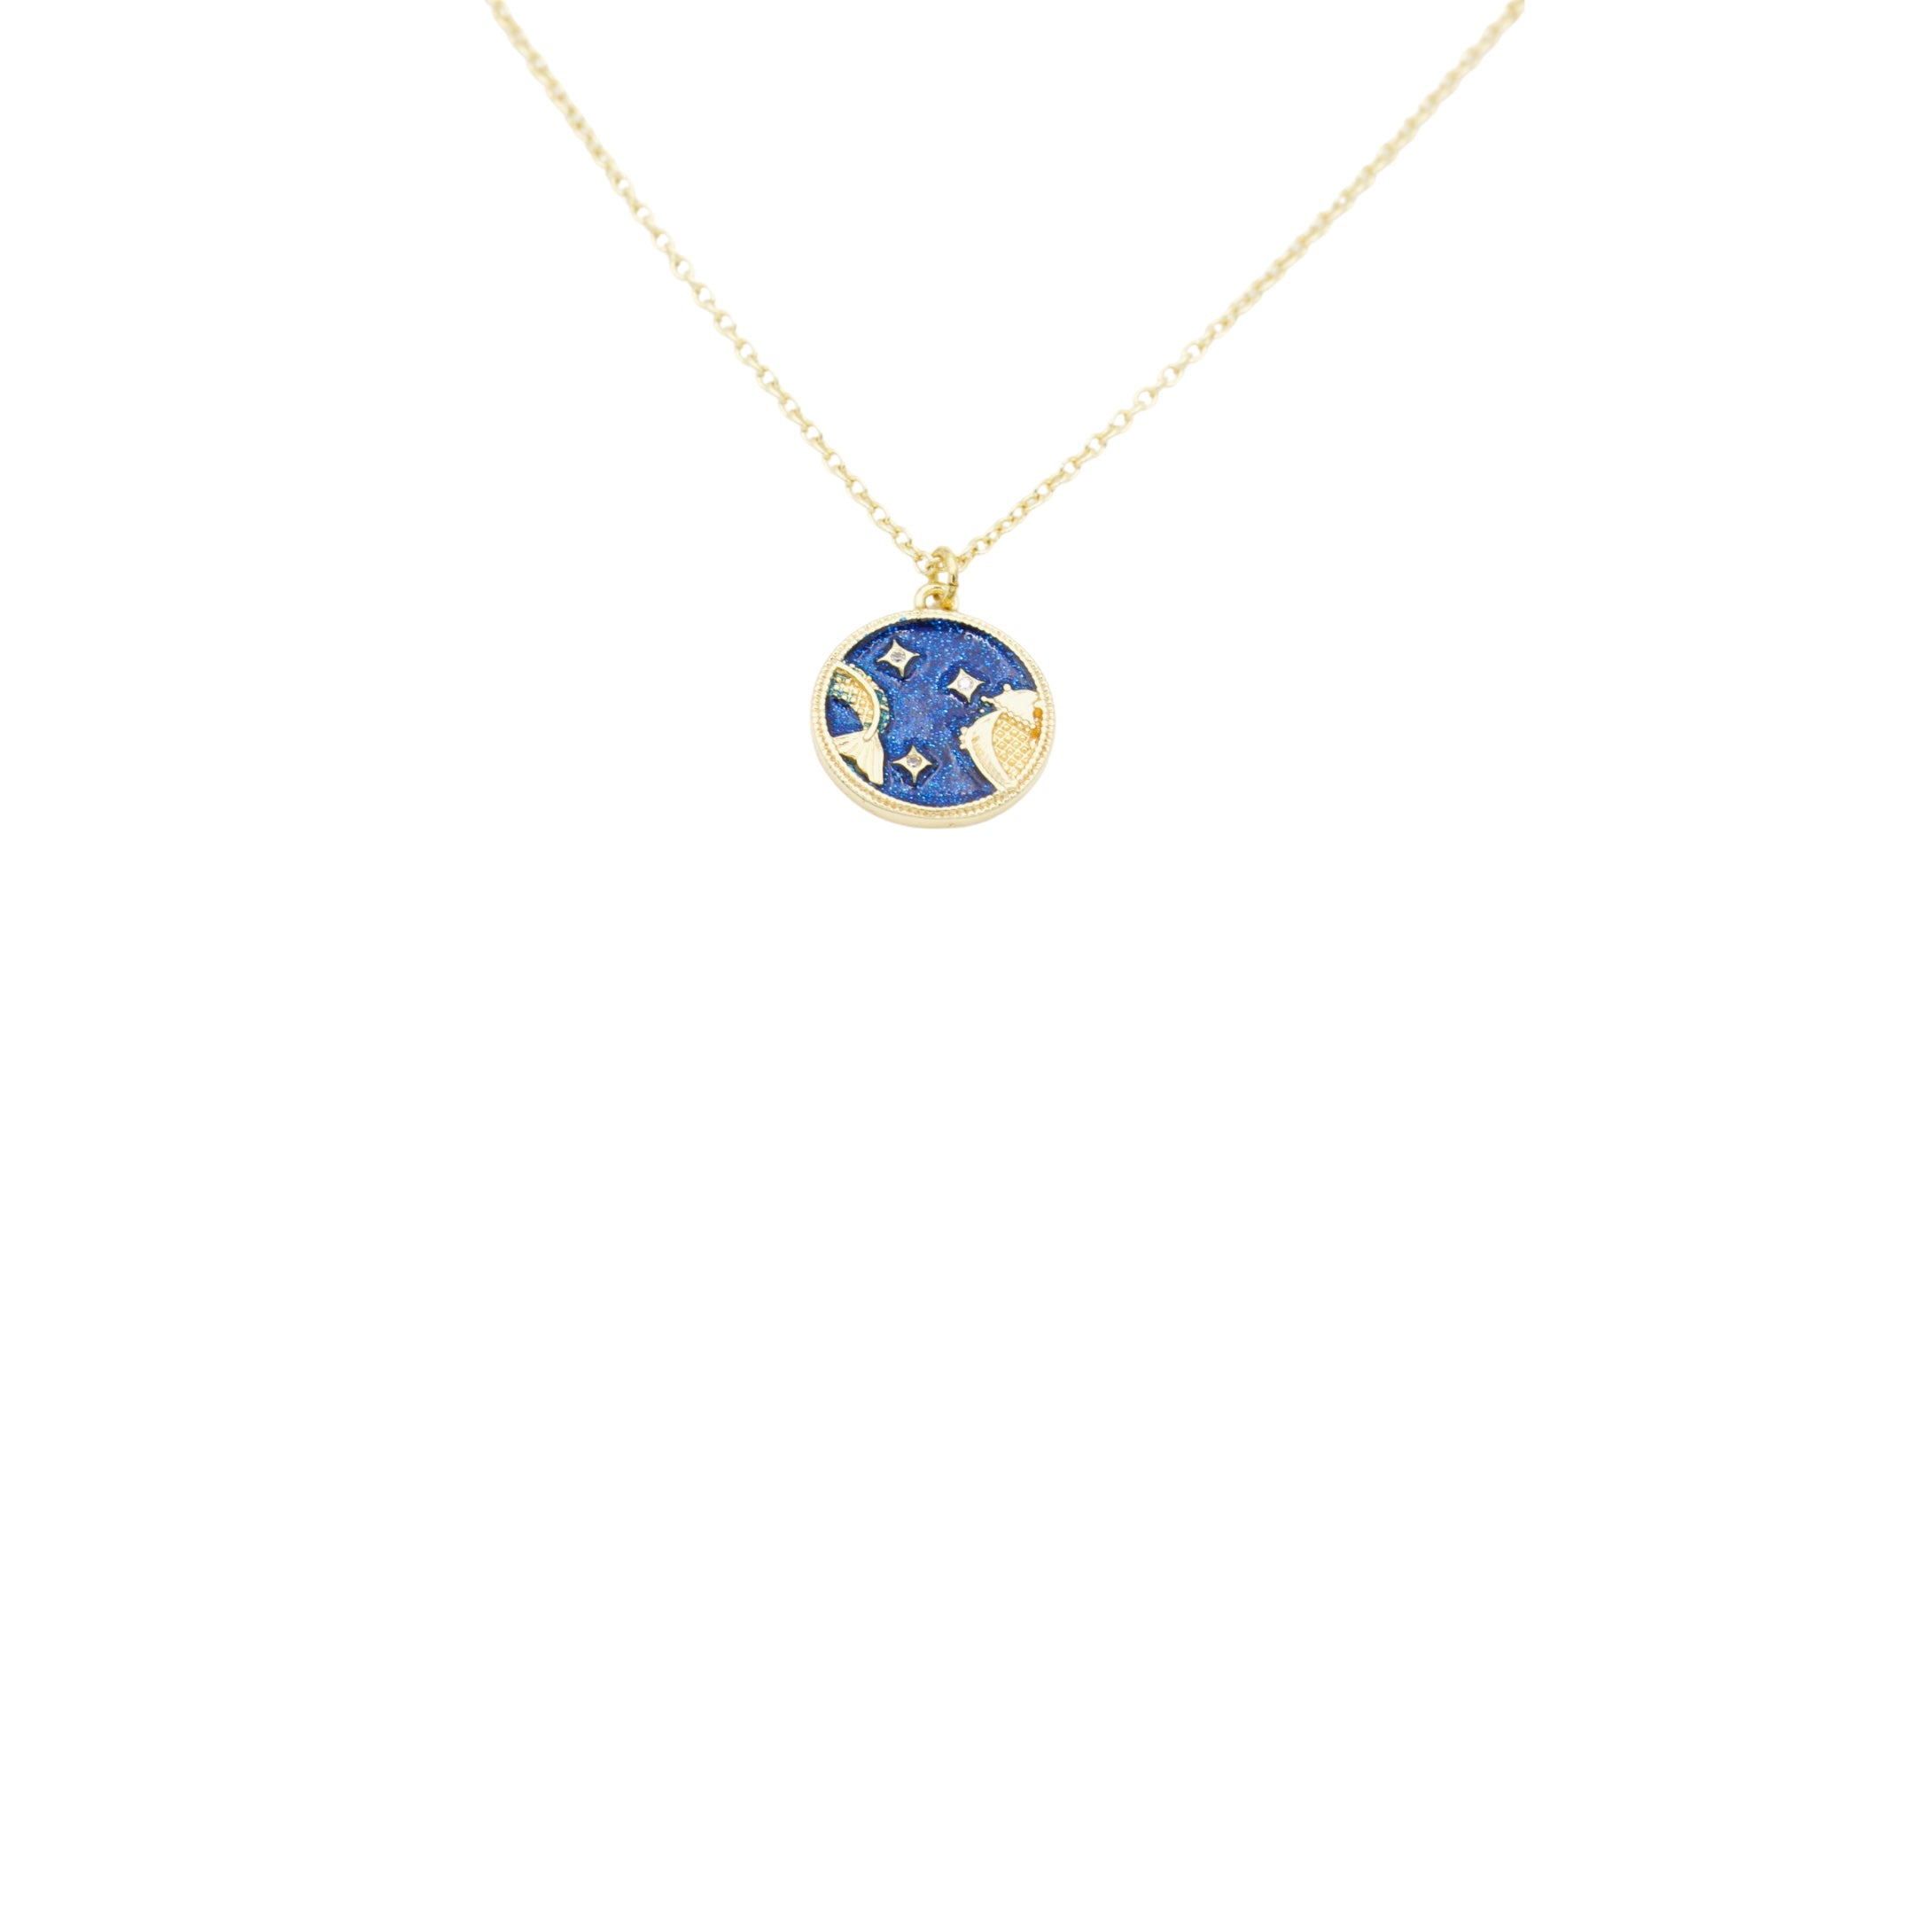 AW Boutique's Zodiac Astro Coin is a dainty pendant full of sparkle and shine.  This piece adds a pop of colour to your everyday wear and at 18 inches is a great length to mix and layer your other chains with.  Proudly wear either your own star sign or the star sign of a loved one close to your heart.  Zodiac shown is Pisces.